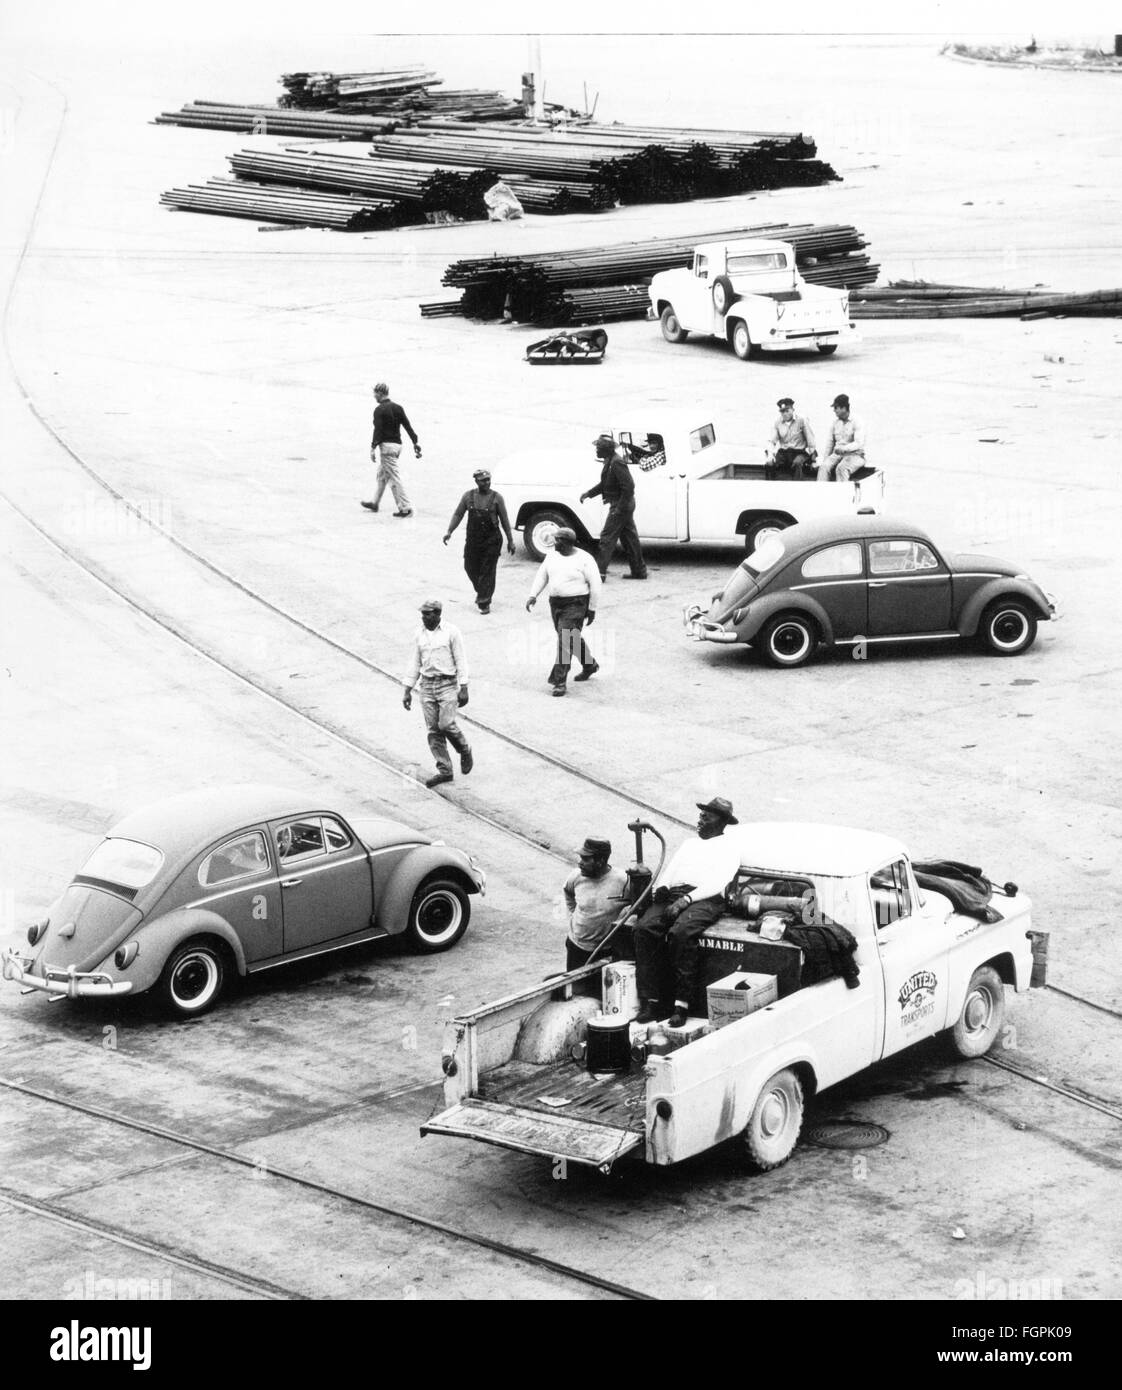 transport / transportation, car, vehicle variants, Volkswagen, VW beetle, refuelling of freshly imported vehicles, harbour, Houston, 1960s, Additional-Rights-Clearences-Not Available Stock Photo